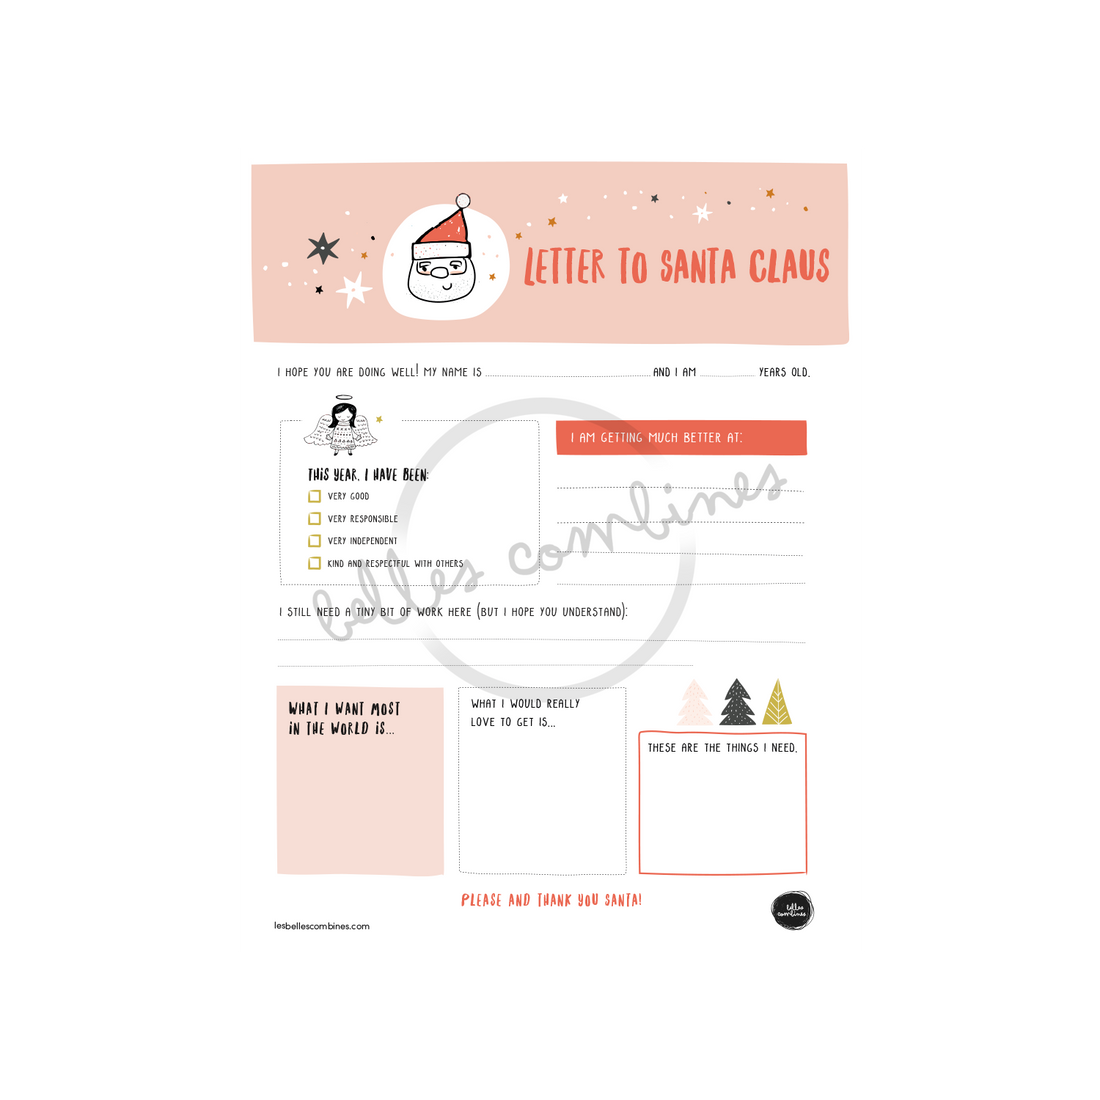 English version of the letter to Santa Claus to print made by Les Belles Combines